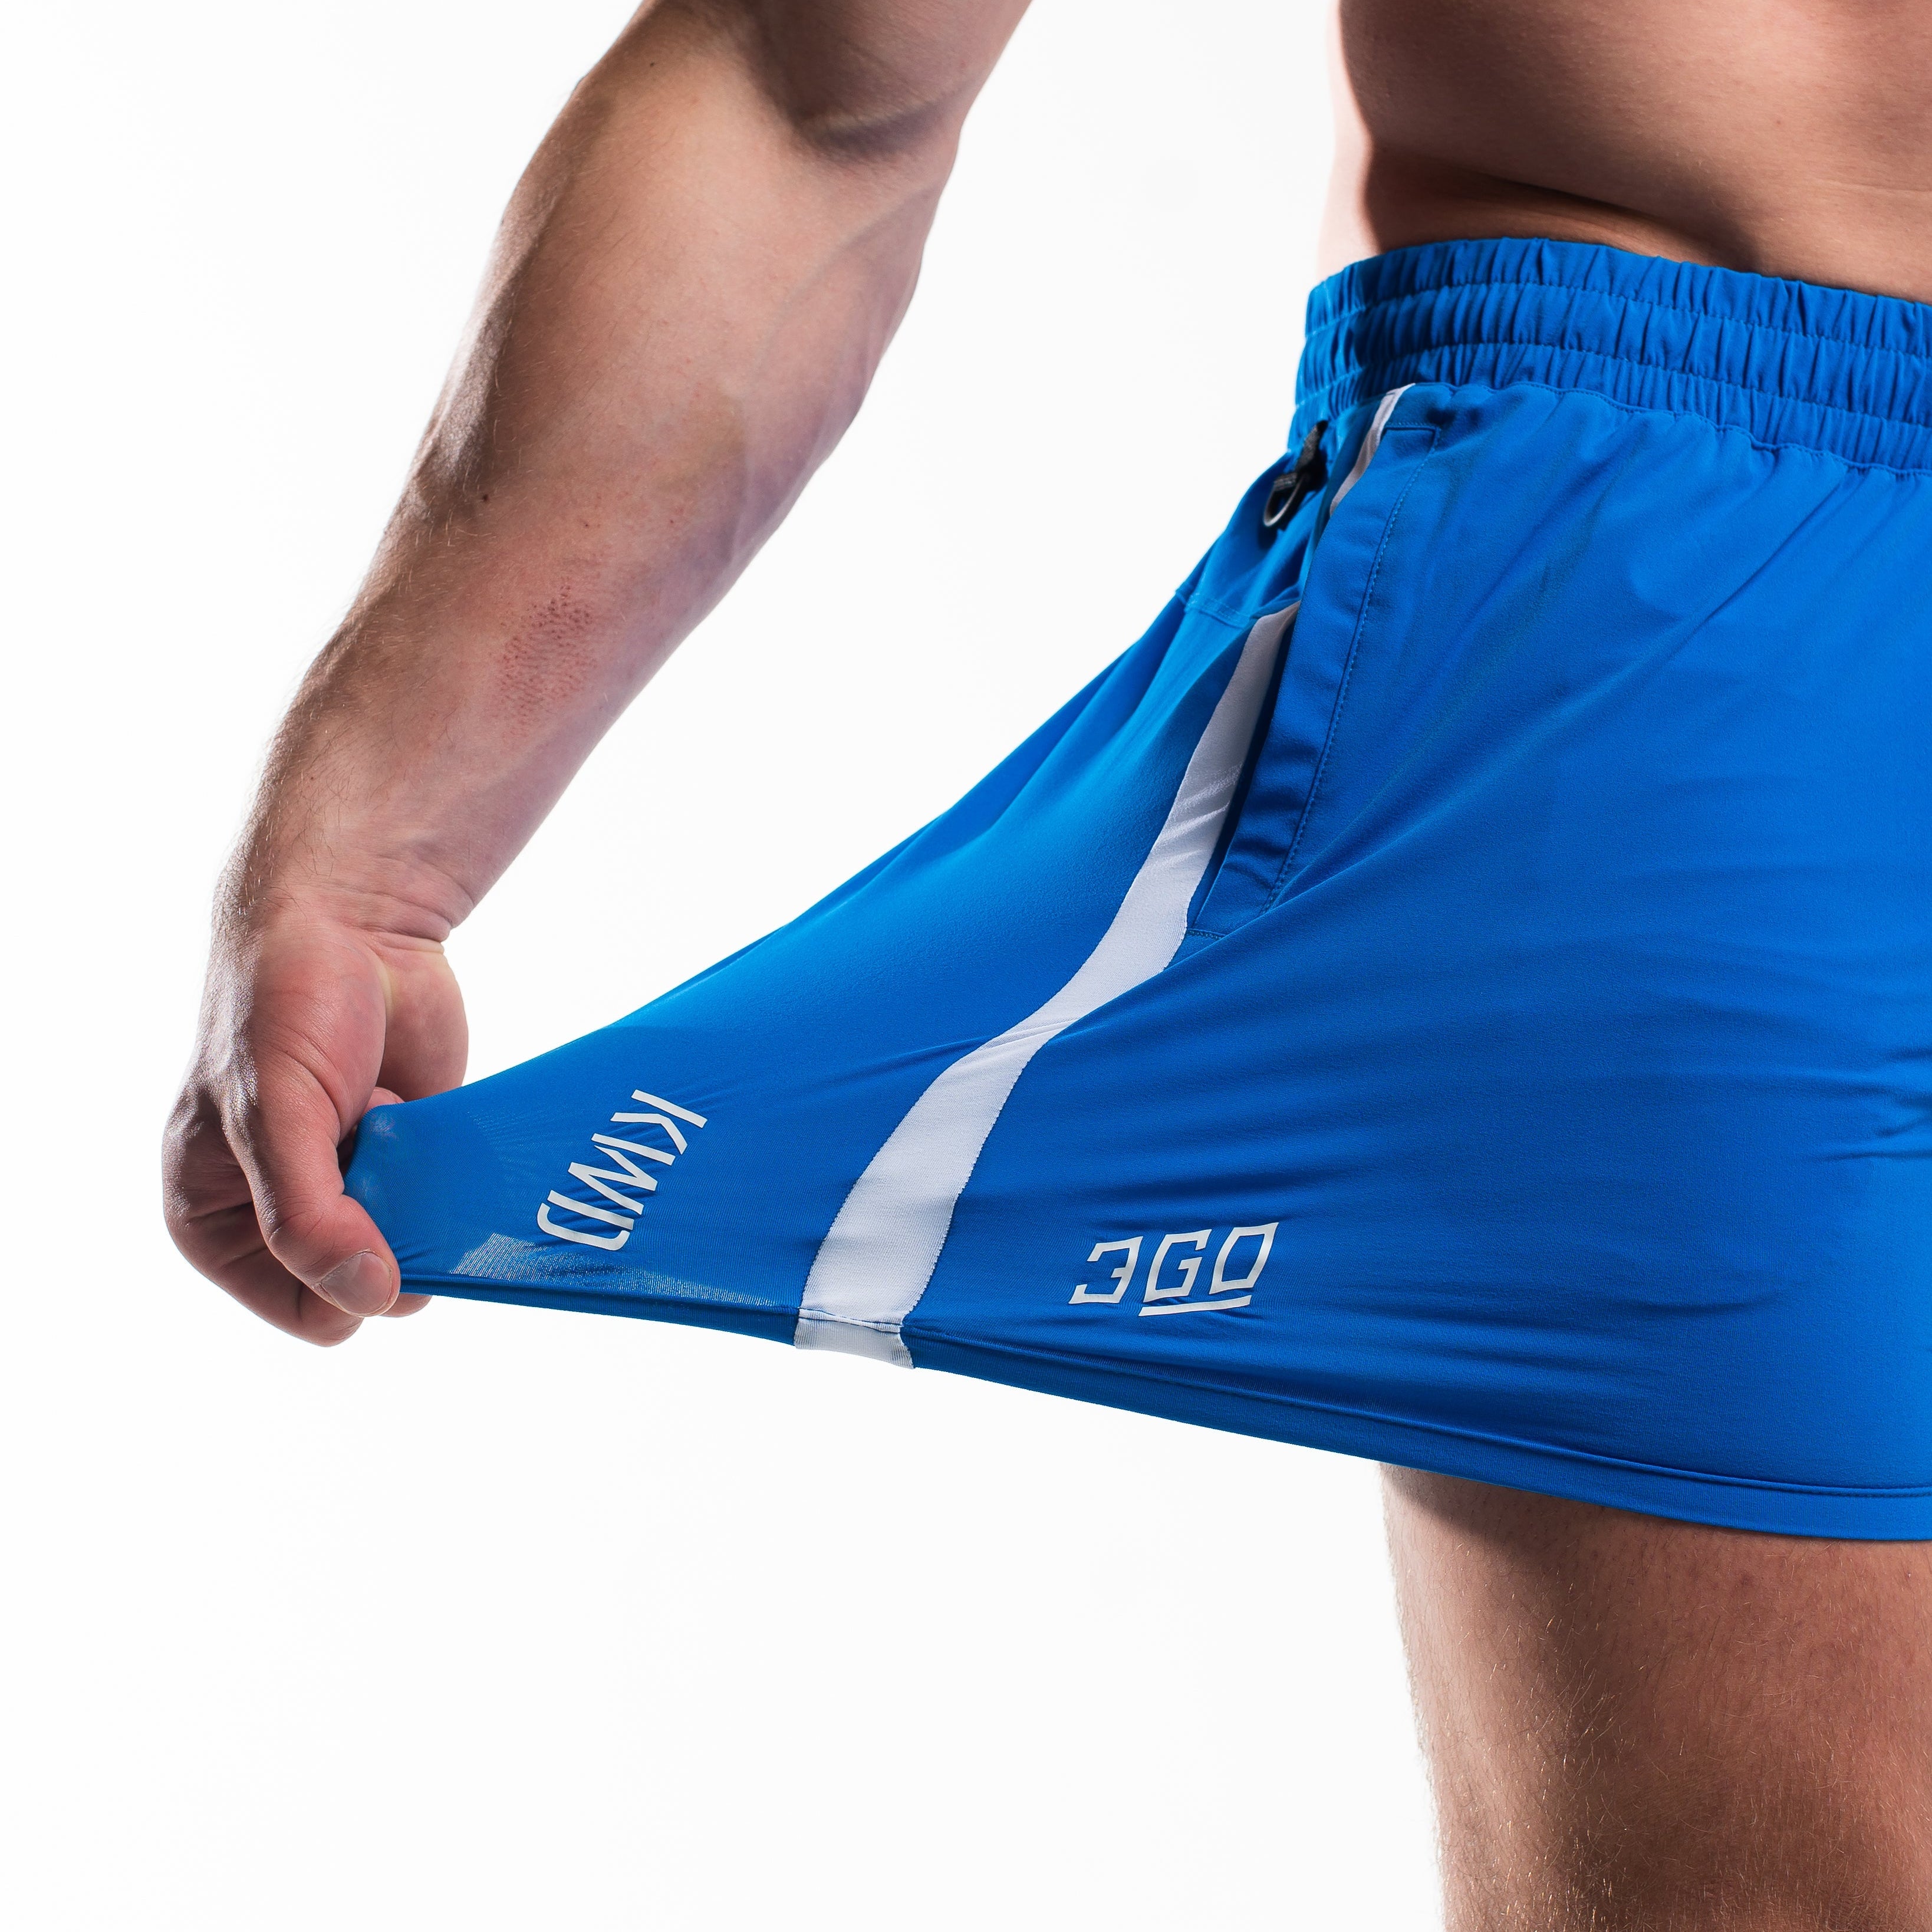 360GO was created to provide the flexibility for all movements in your training while offering comfort. These shorts offer 360 degrees of stretch in all angles and allow you to remain comfortable without limiting any movement in both training and life environments. Designed with a wide drawstring to easily adjust your waist without slipping. Purchase 360GO KWD Squat Shorts from A7 UK. Genouillères powerlifting shipping to France, Spain, Ireland, Germany, Italy, Sweden and EU.